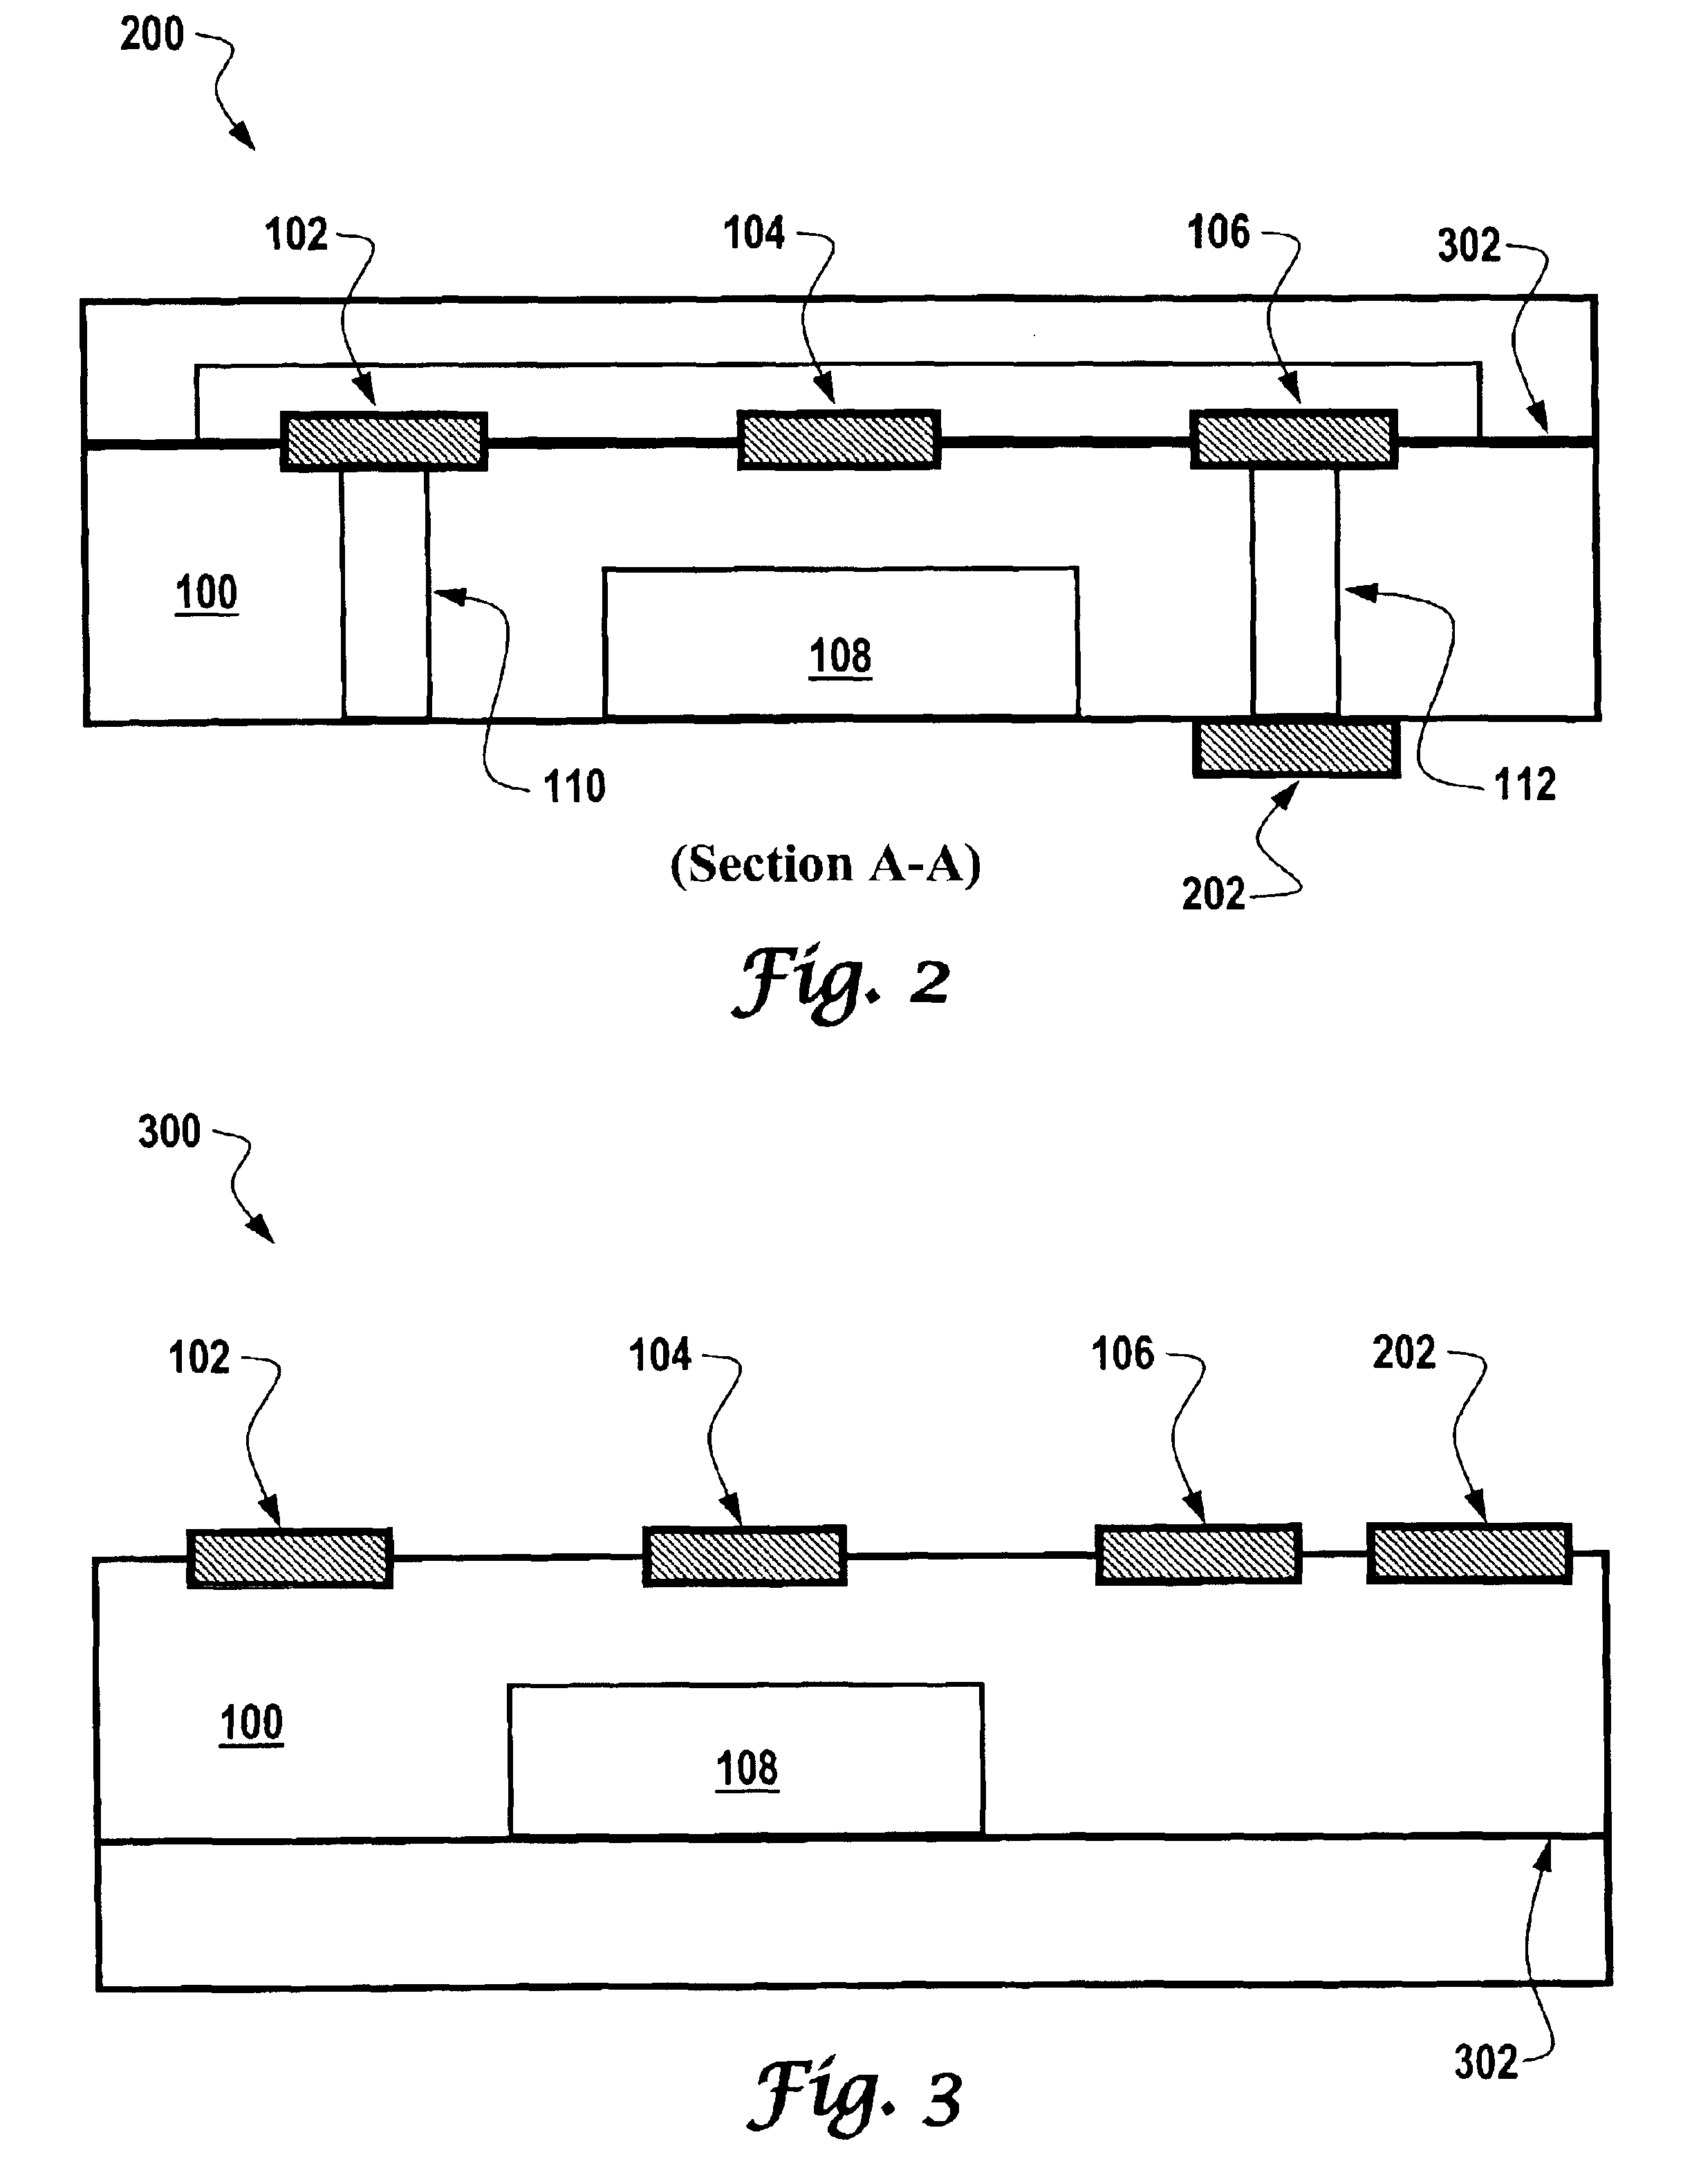 Surface acoustic wave pressure sensor with microstructure sensing elements